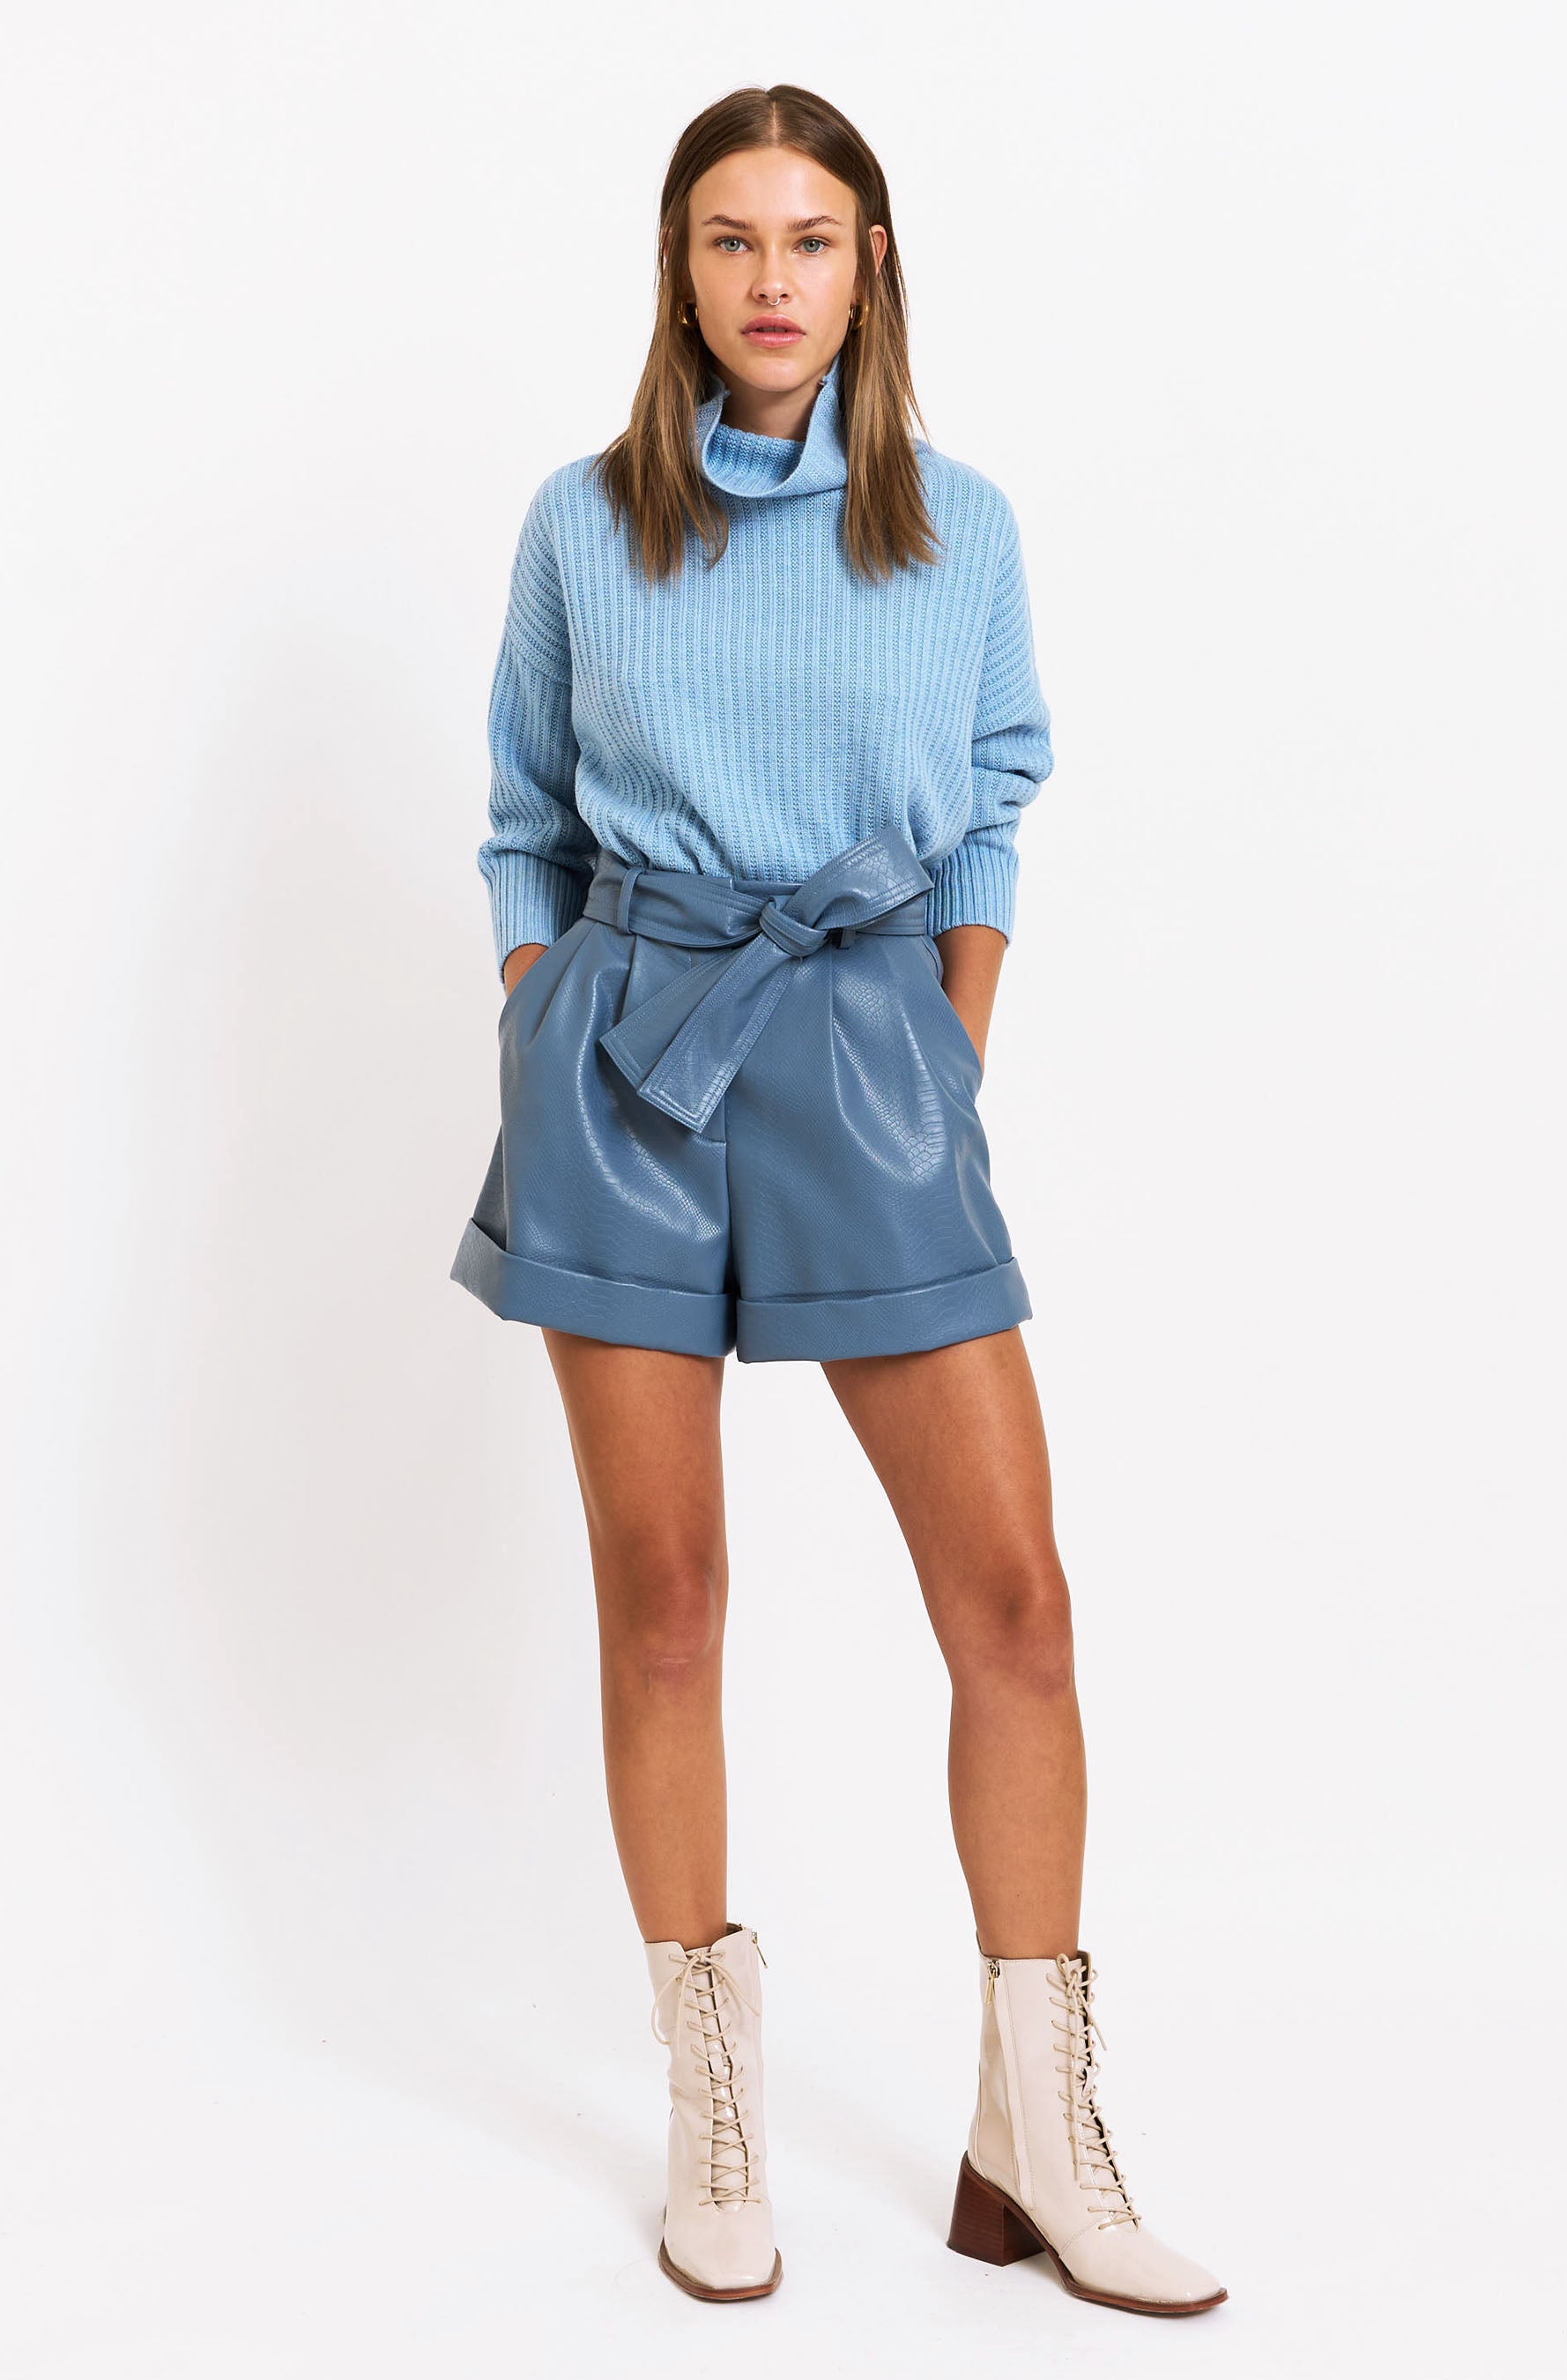 Everly Sweater - Baby Blue